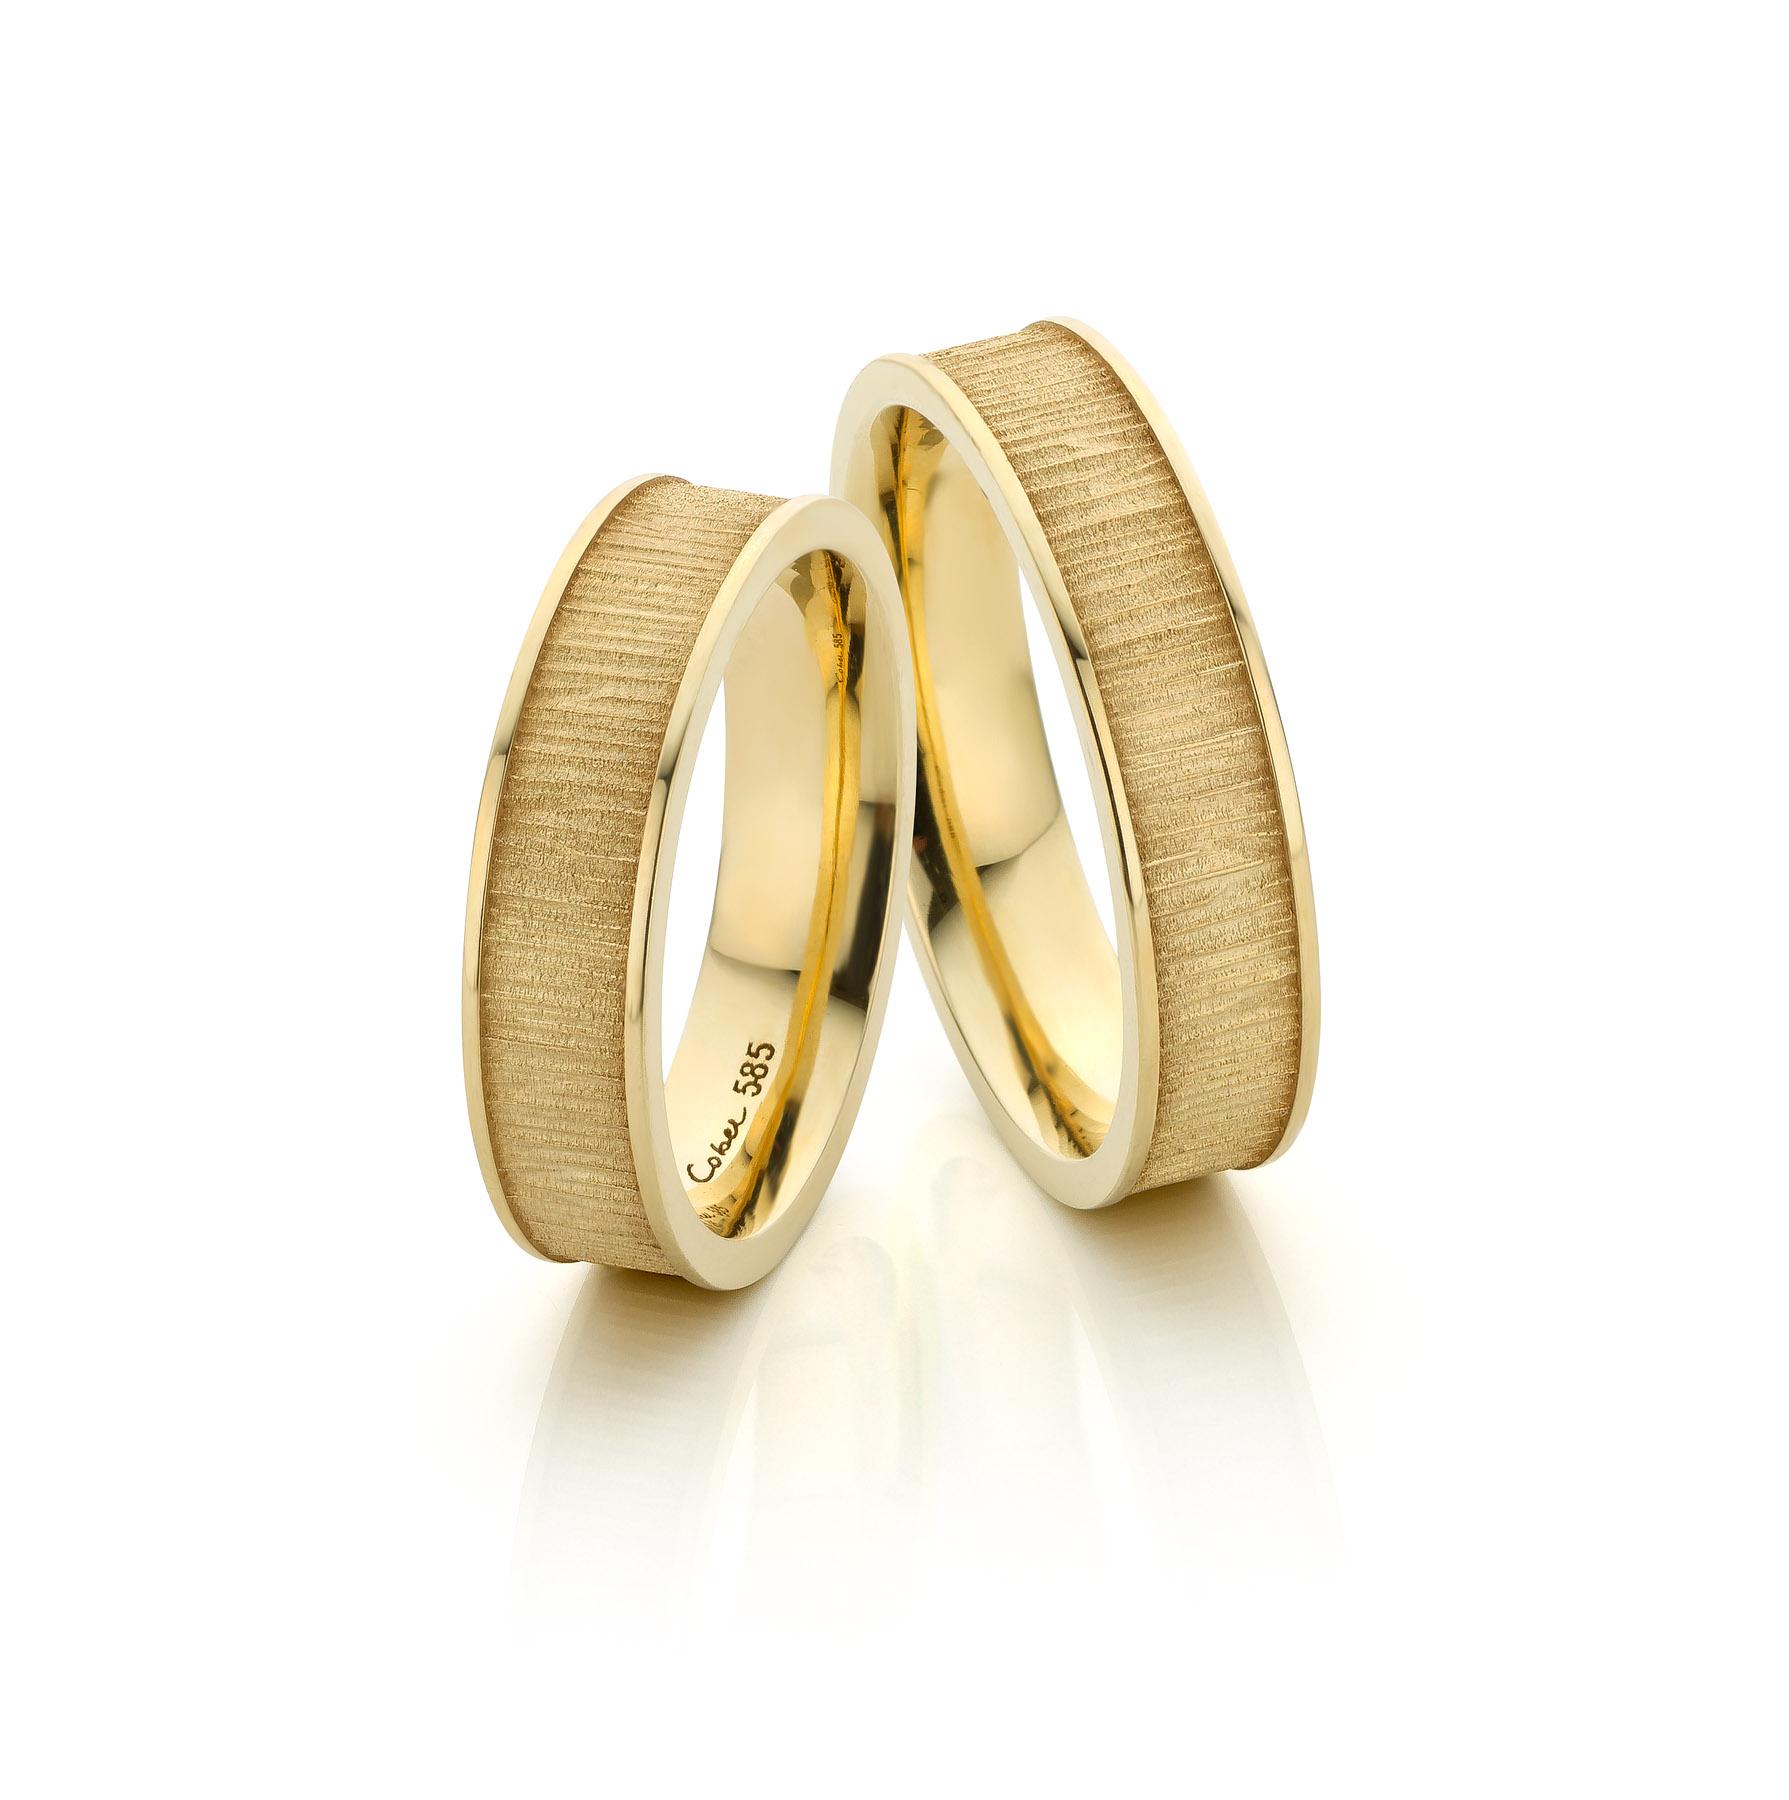 For Sale:  Cober Jewellery “Eternal Forest” Yellow Gold Wedding Bands Rings 4